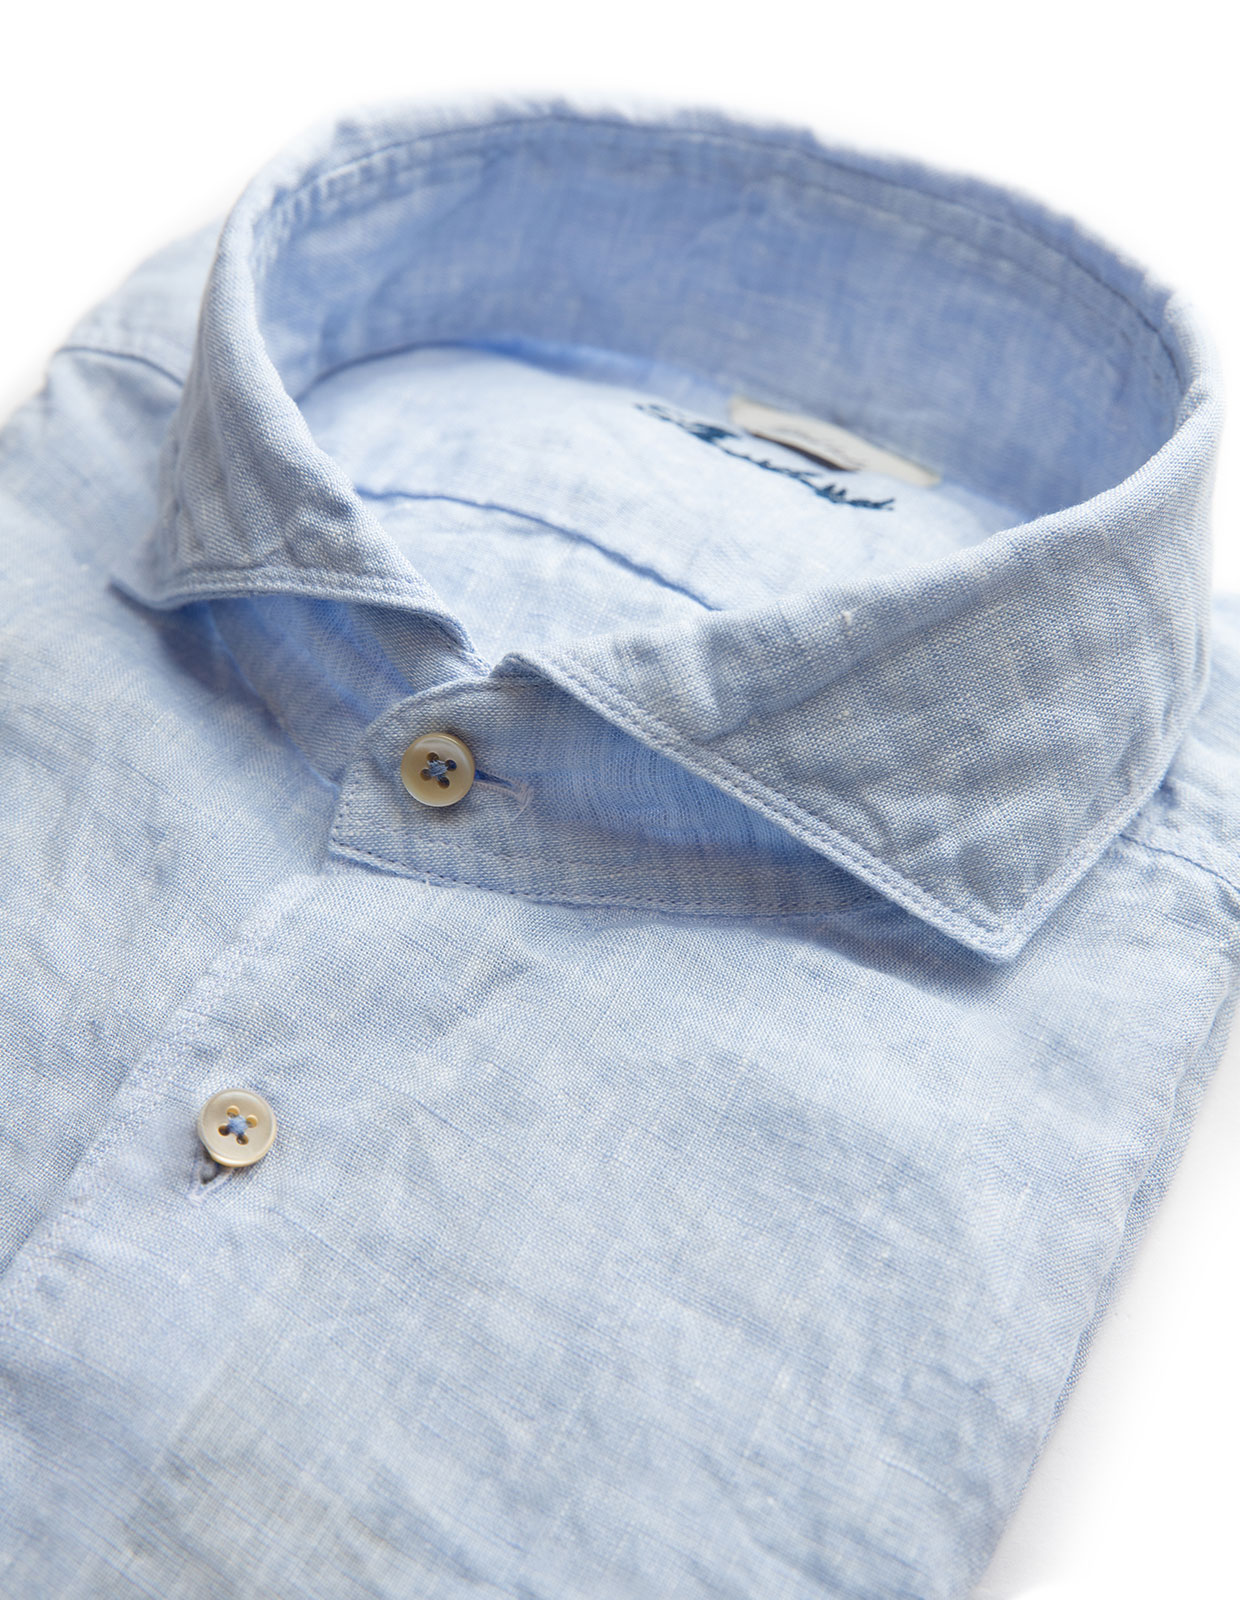 Fitted Body Linen Shirt Pale Blue Stl L